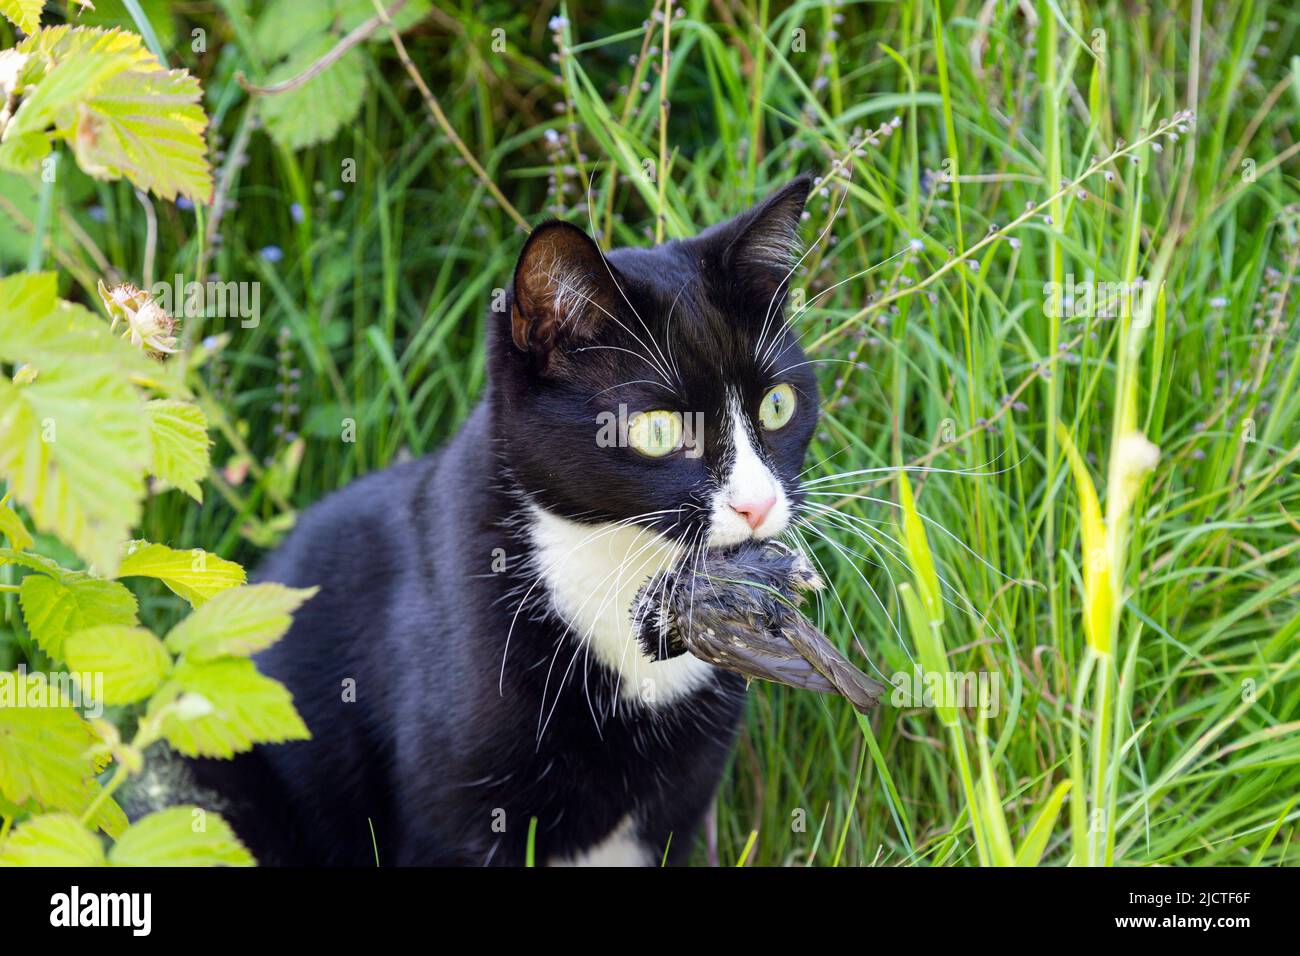 Black and white domestic short hair cat with a small bird that it's caught in its mouth Stock Photo